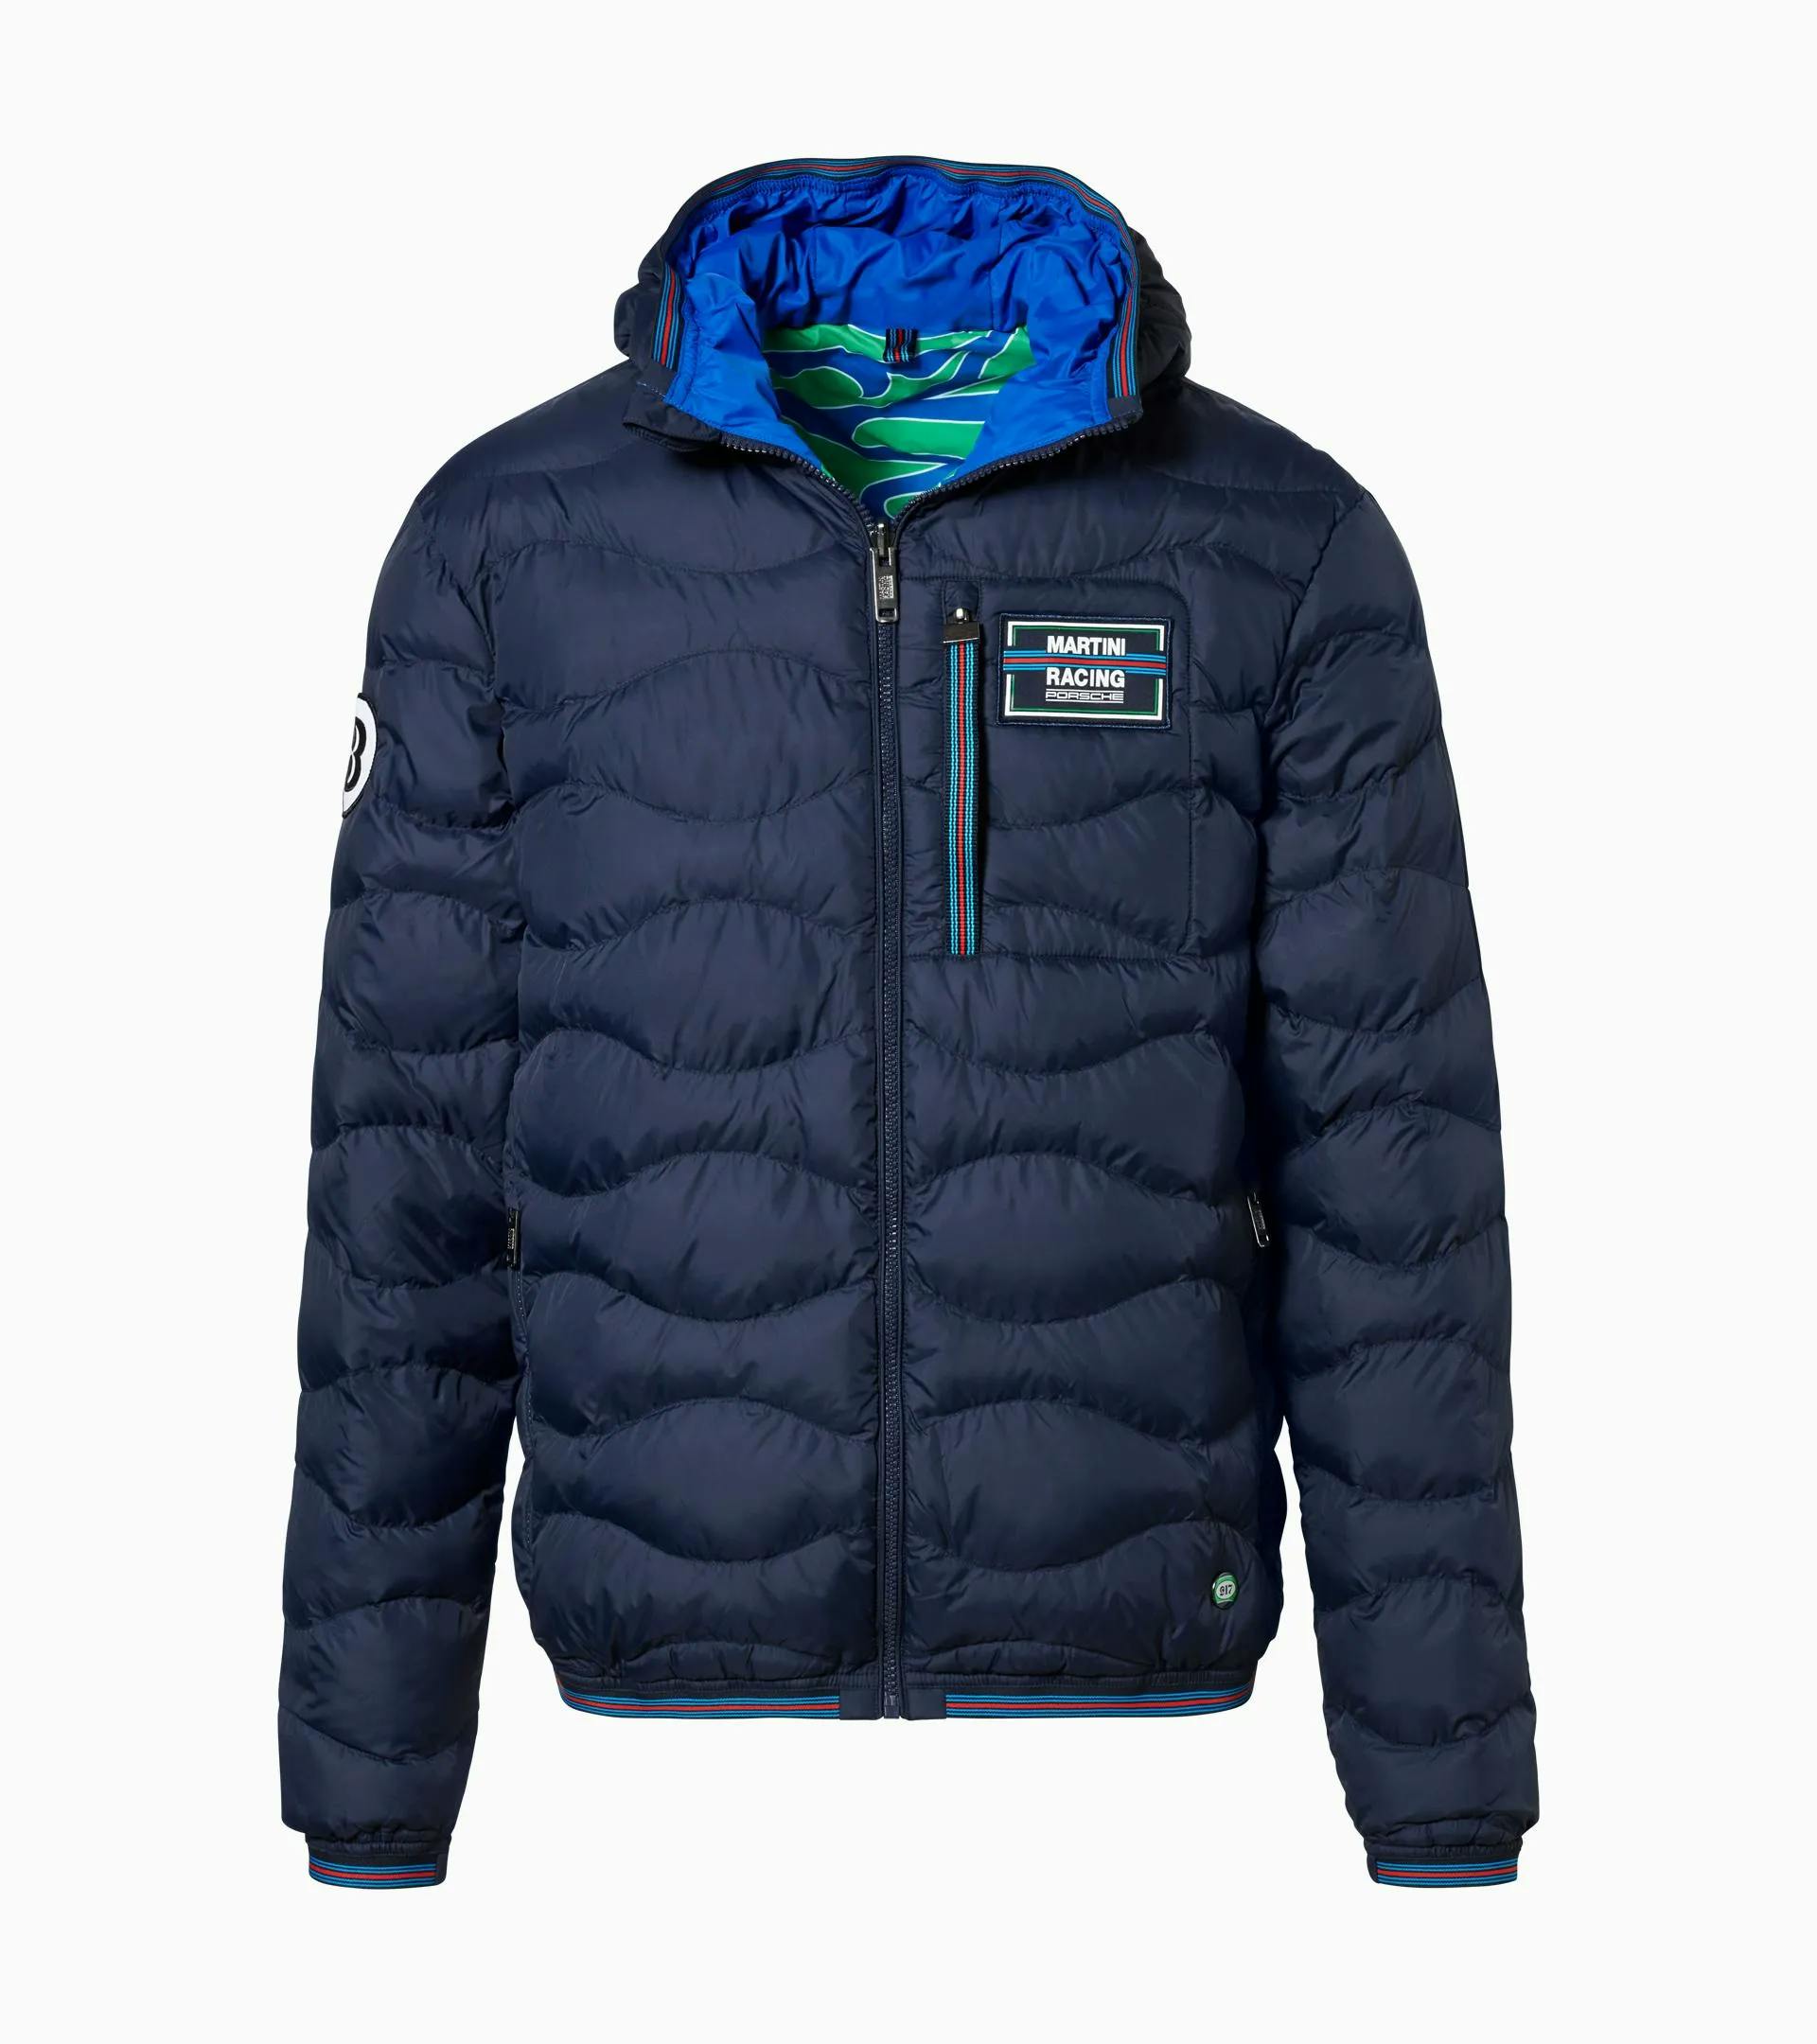 Reversible quilted jacket – MARTINI RACING® 2